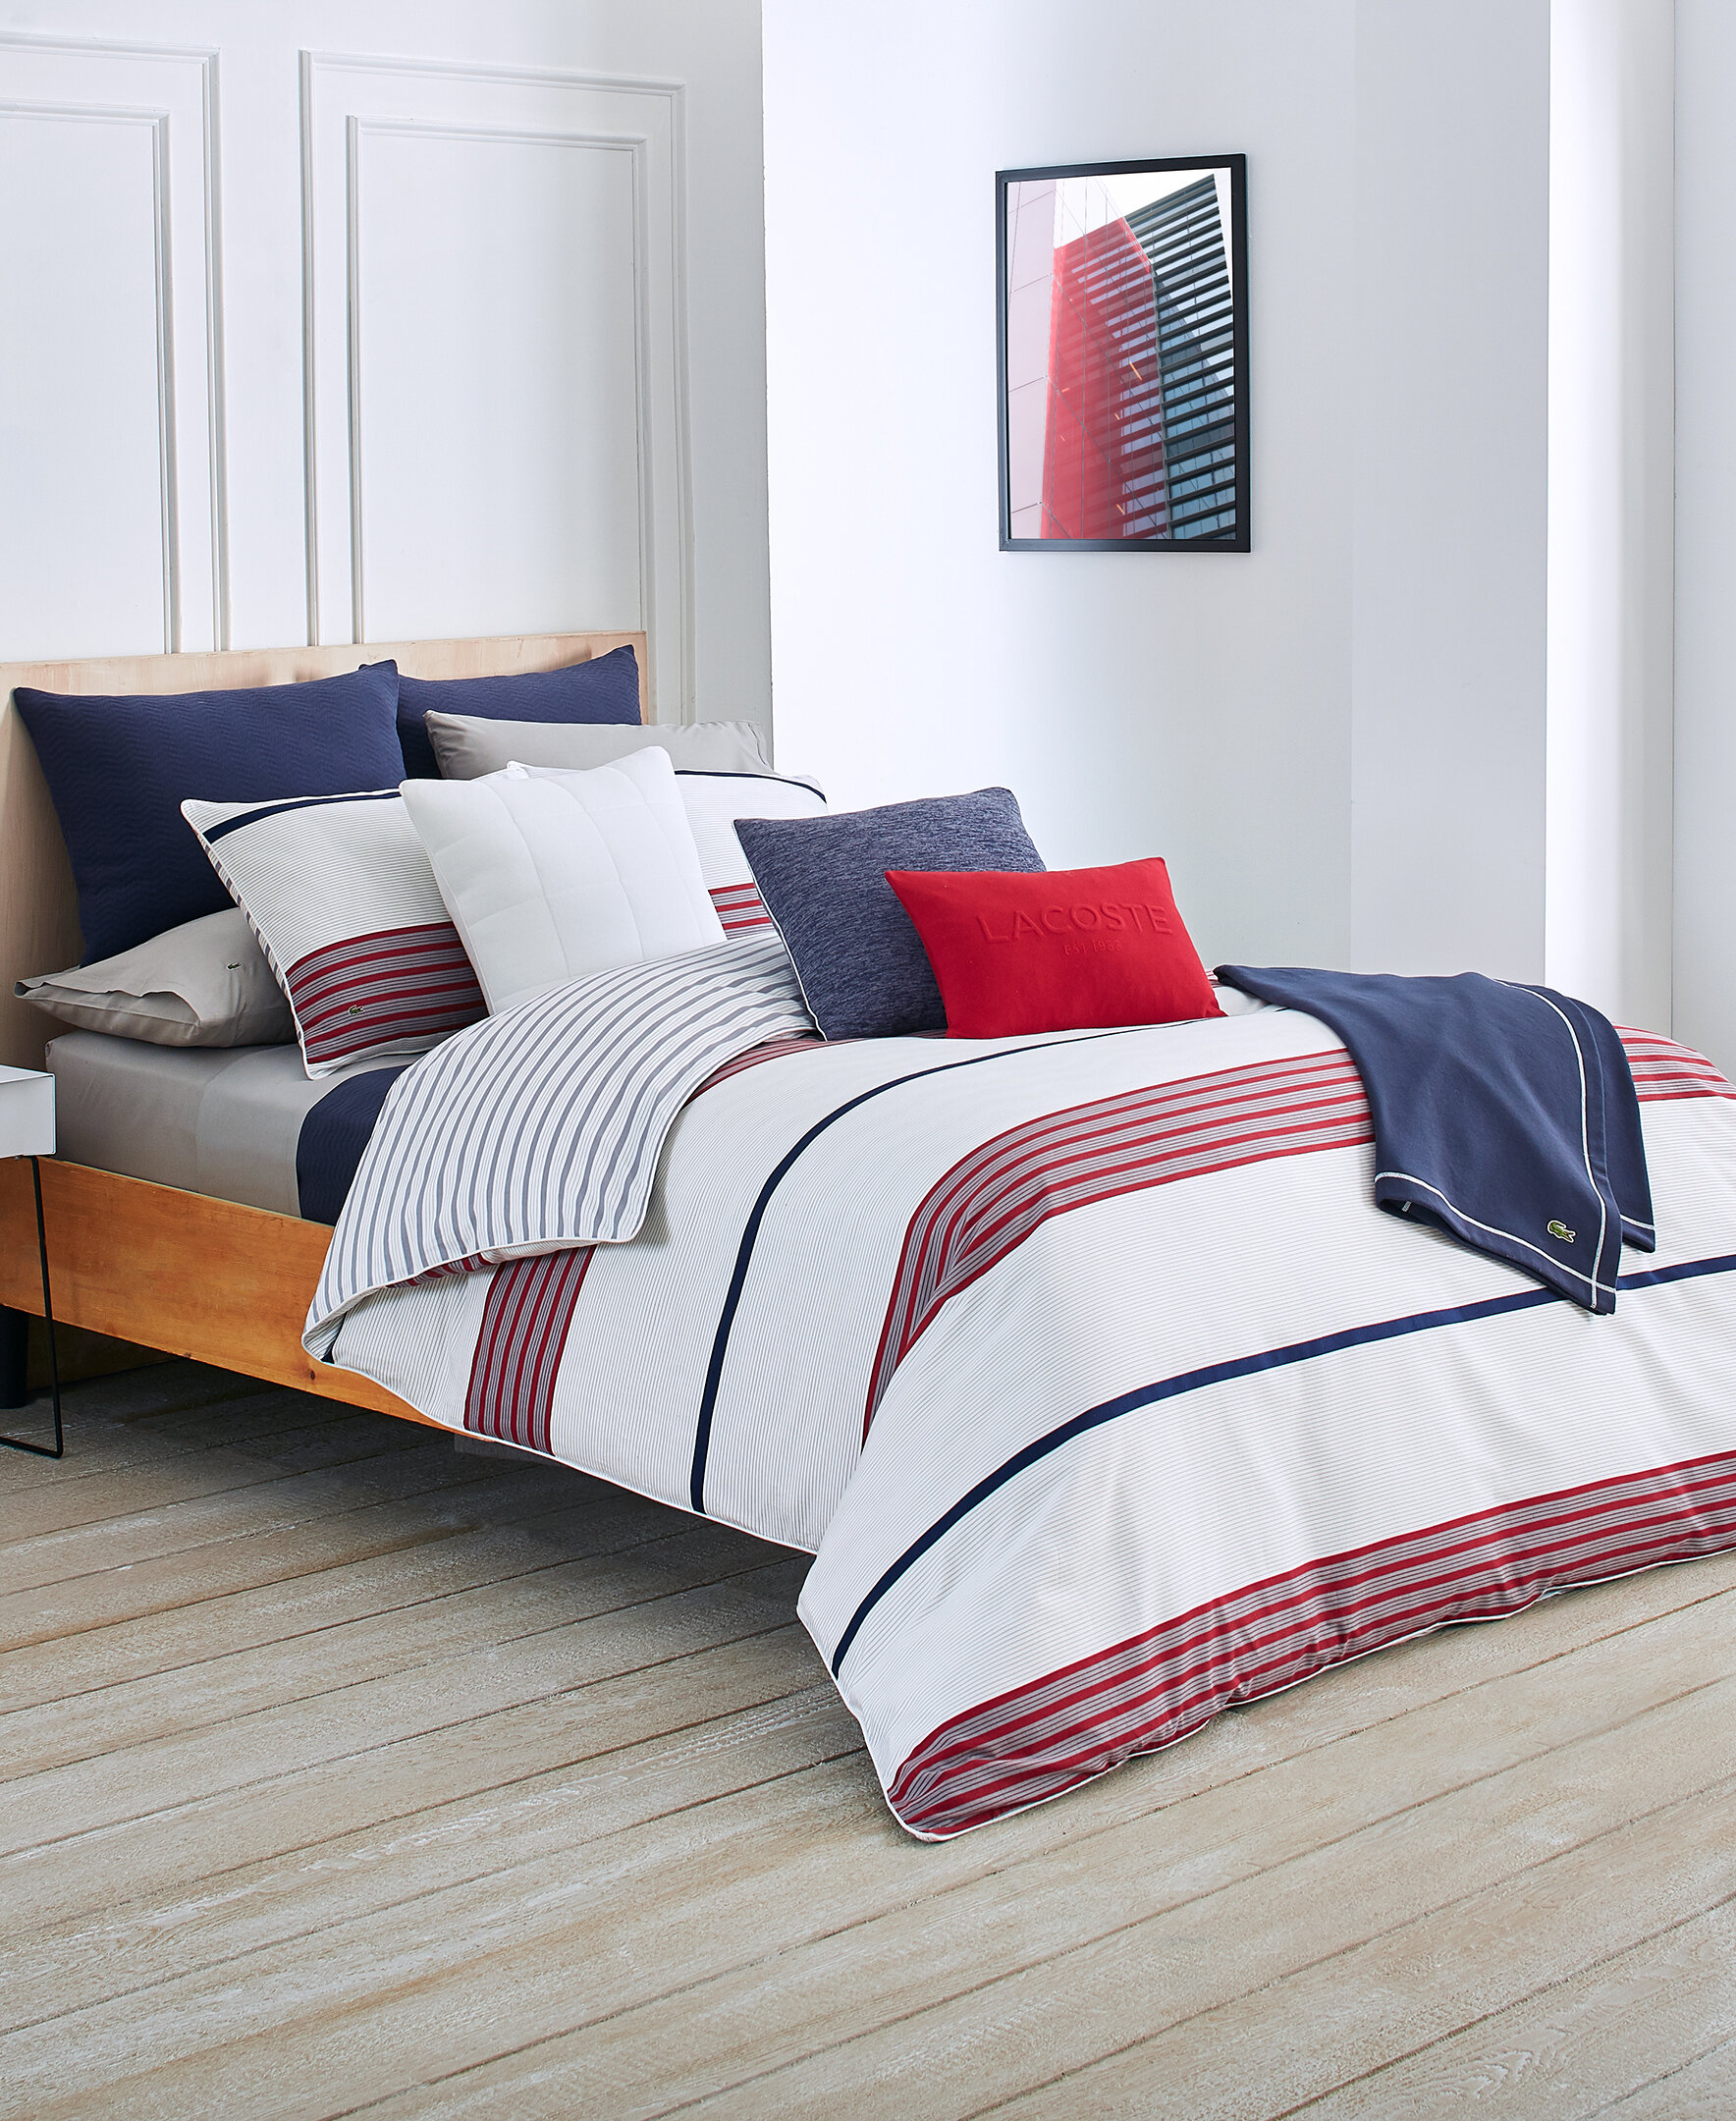 Lacoste Bedding You'll Love in 2021 